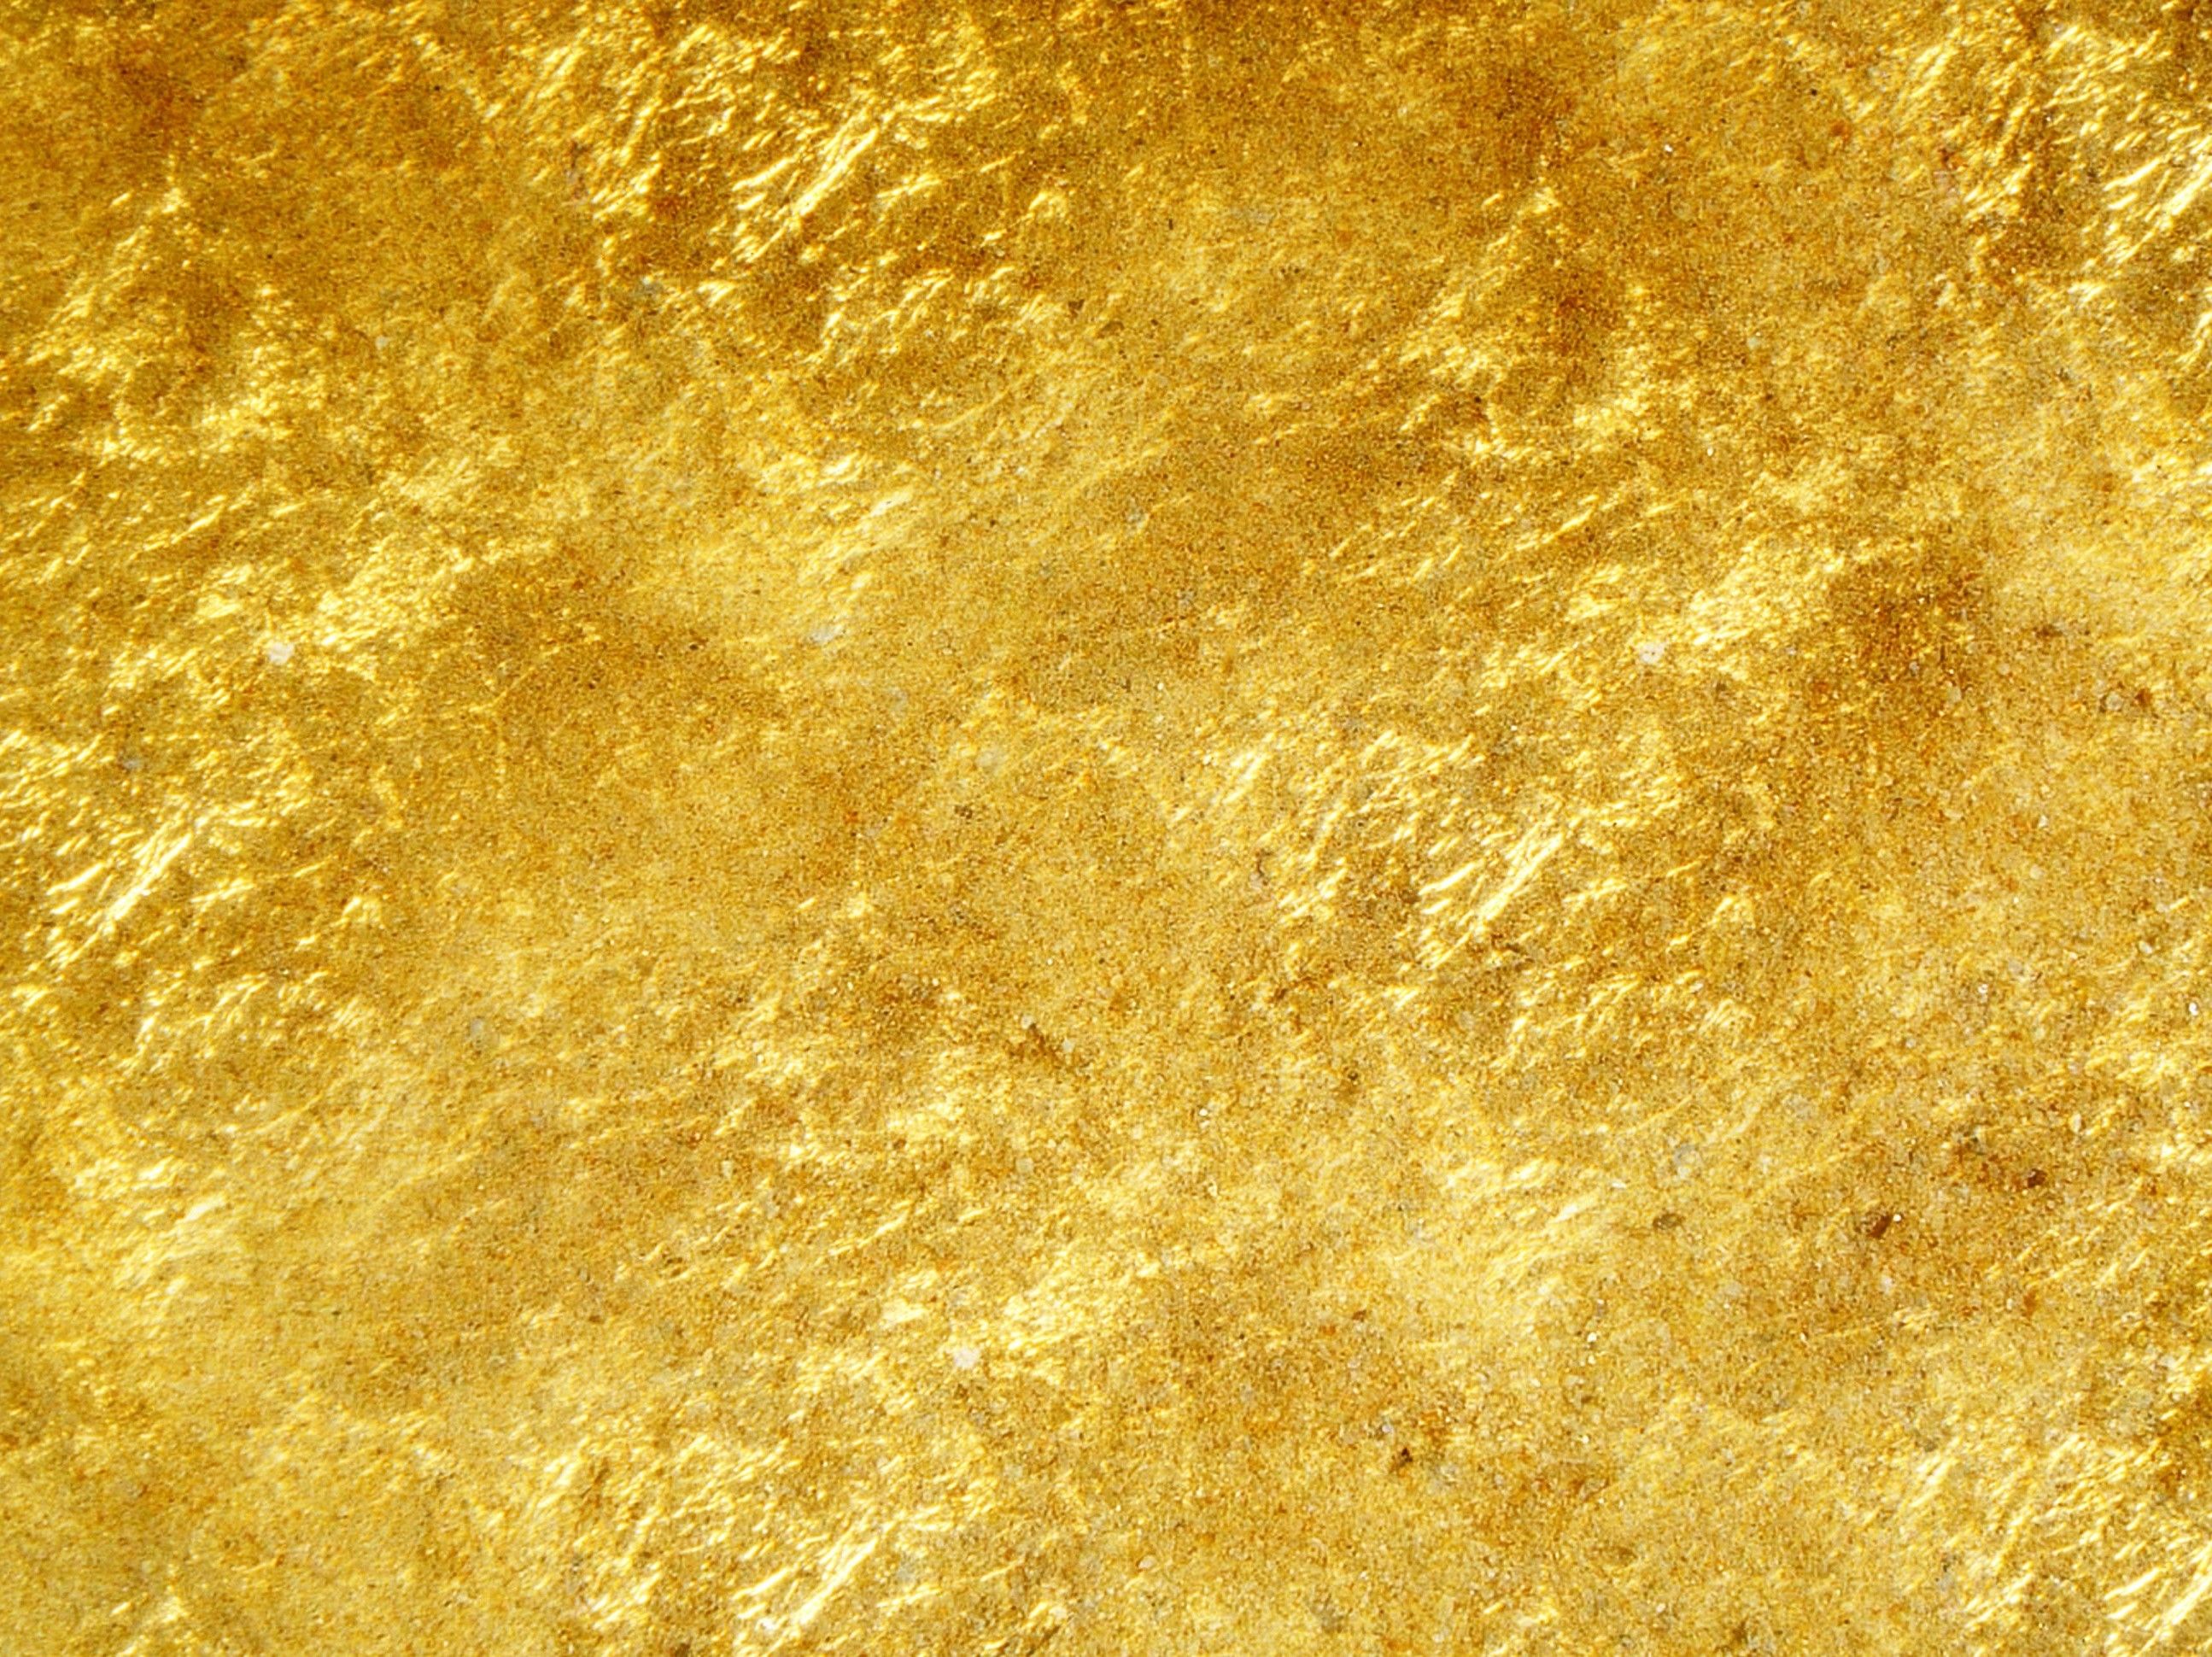 Gold backgroundDownload free amazing full HD background